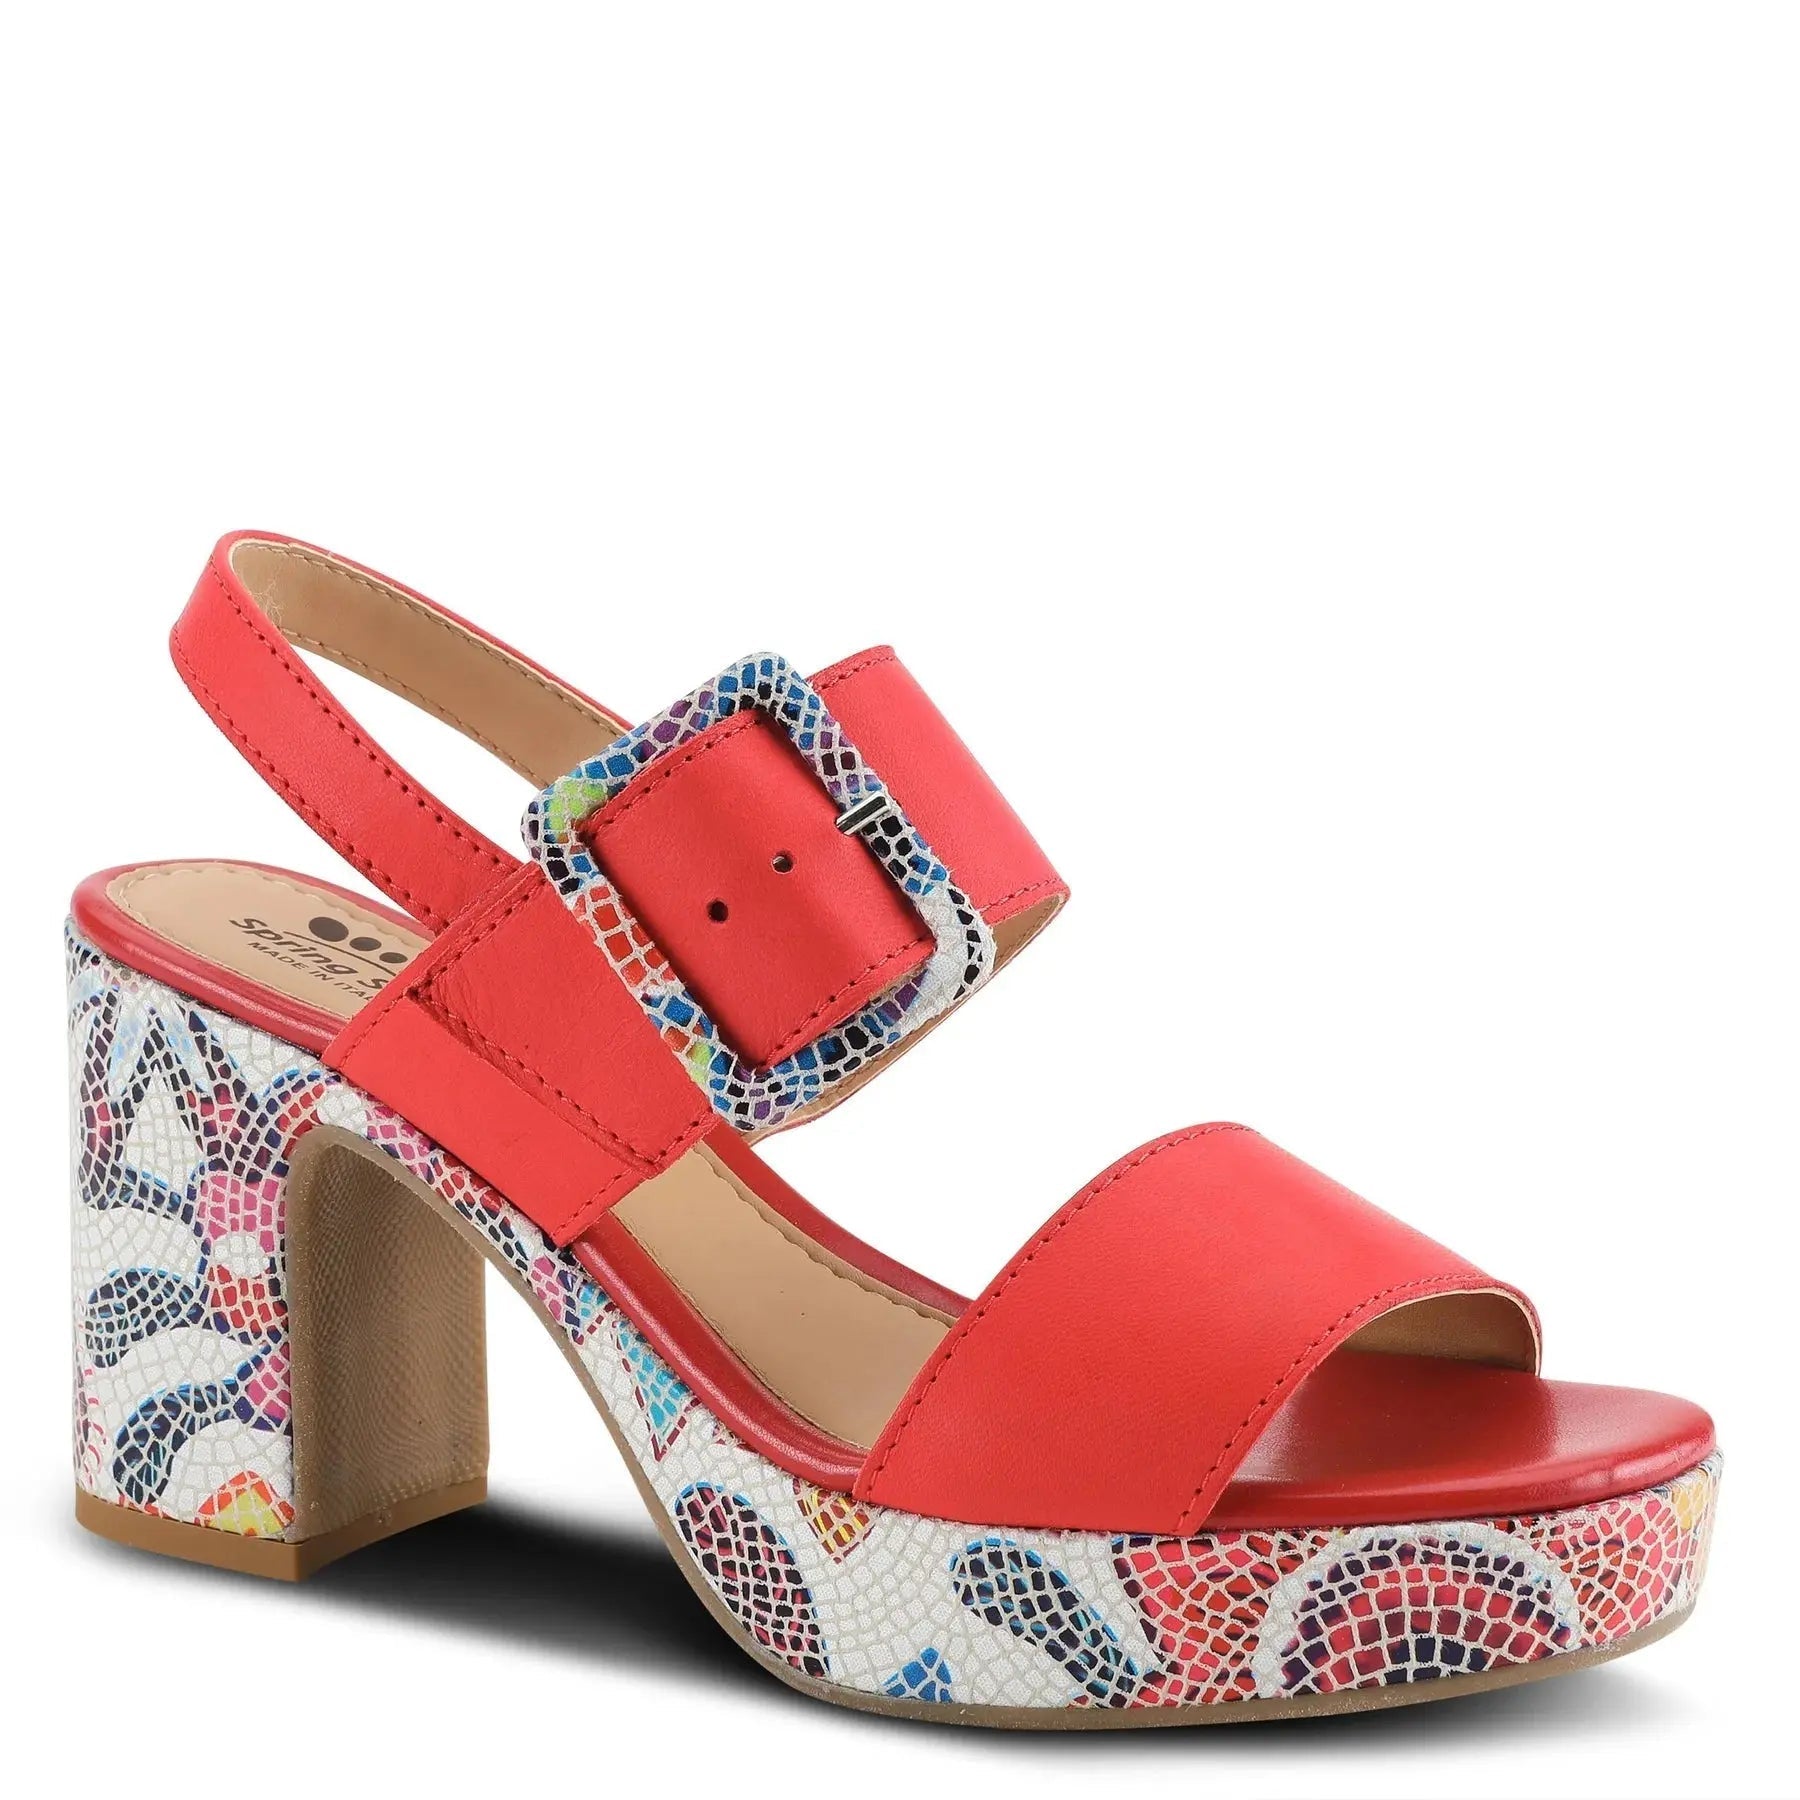 SPRING STEP AZUCAR SANDALS - RED MULTI - Becker's Best Shoes